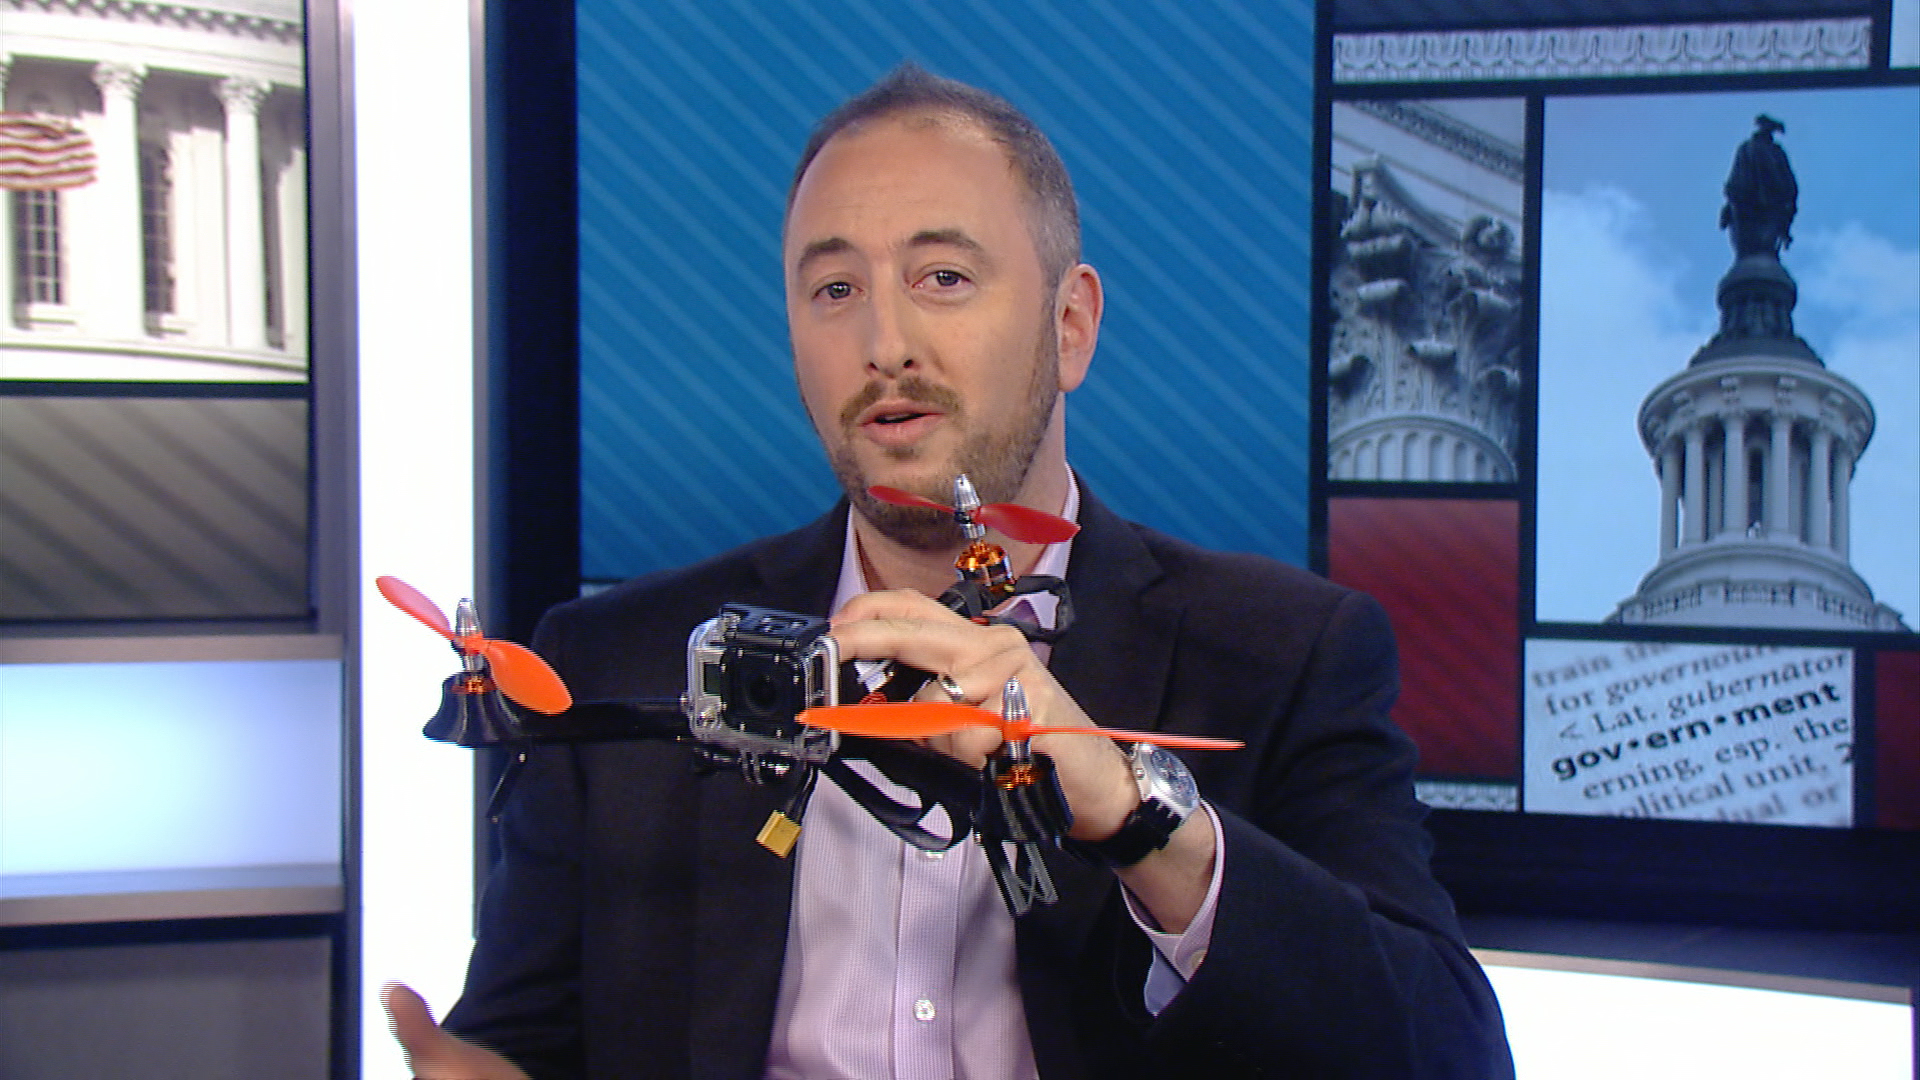 These Folks Can Build Drones That Might One-Up Amazon